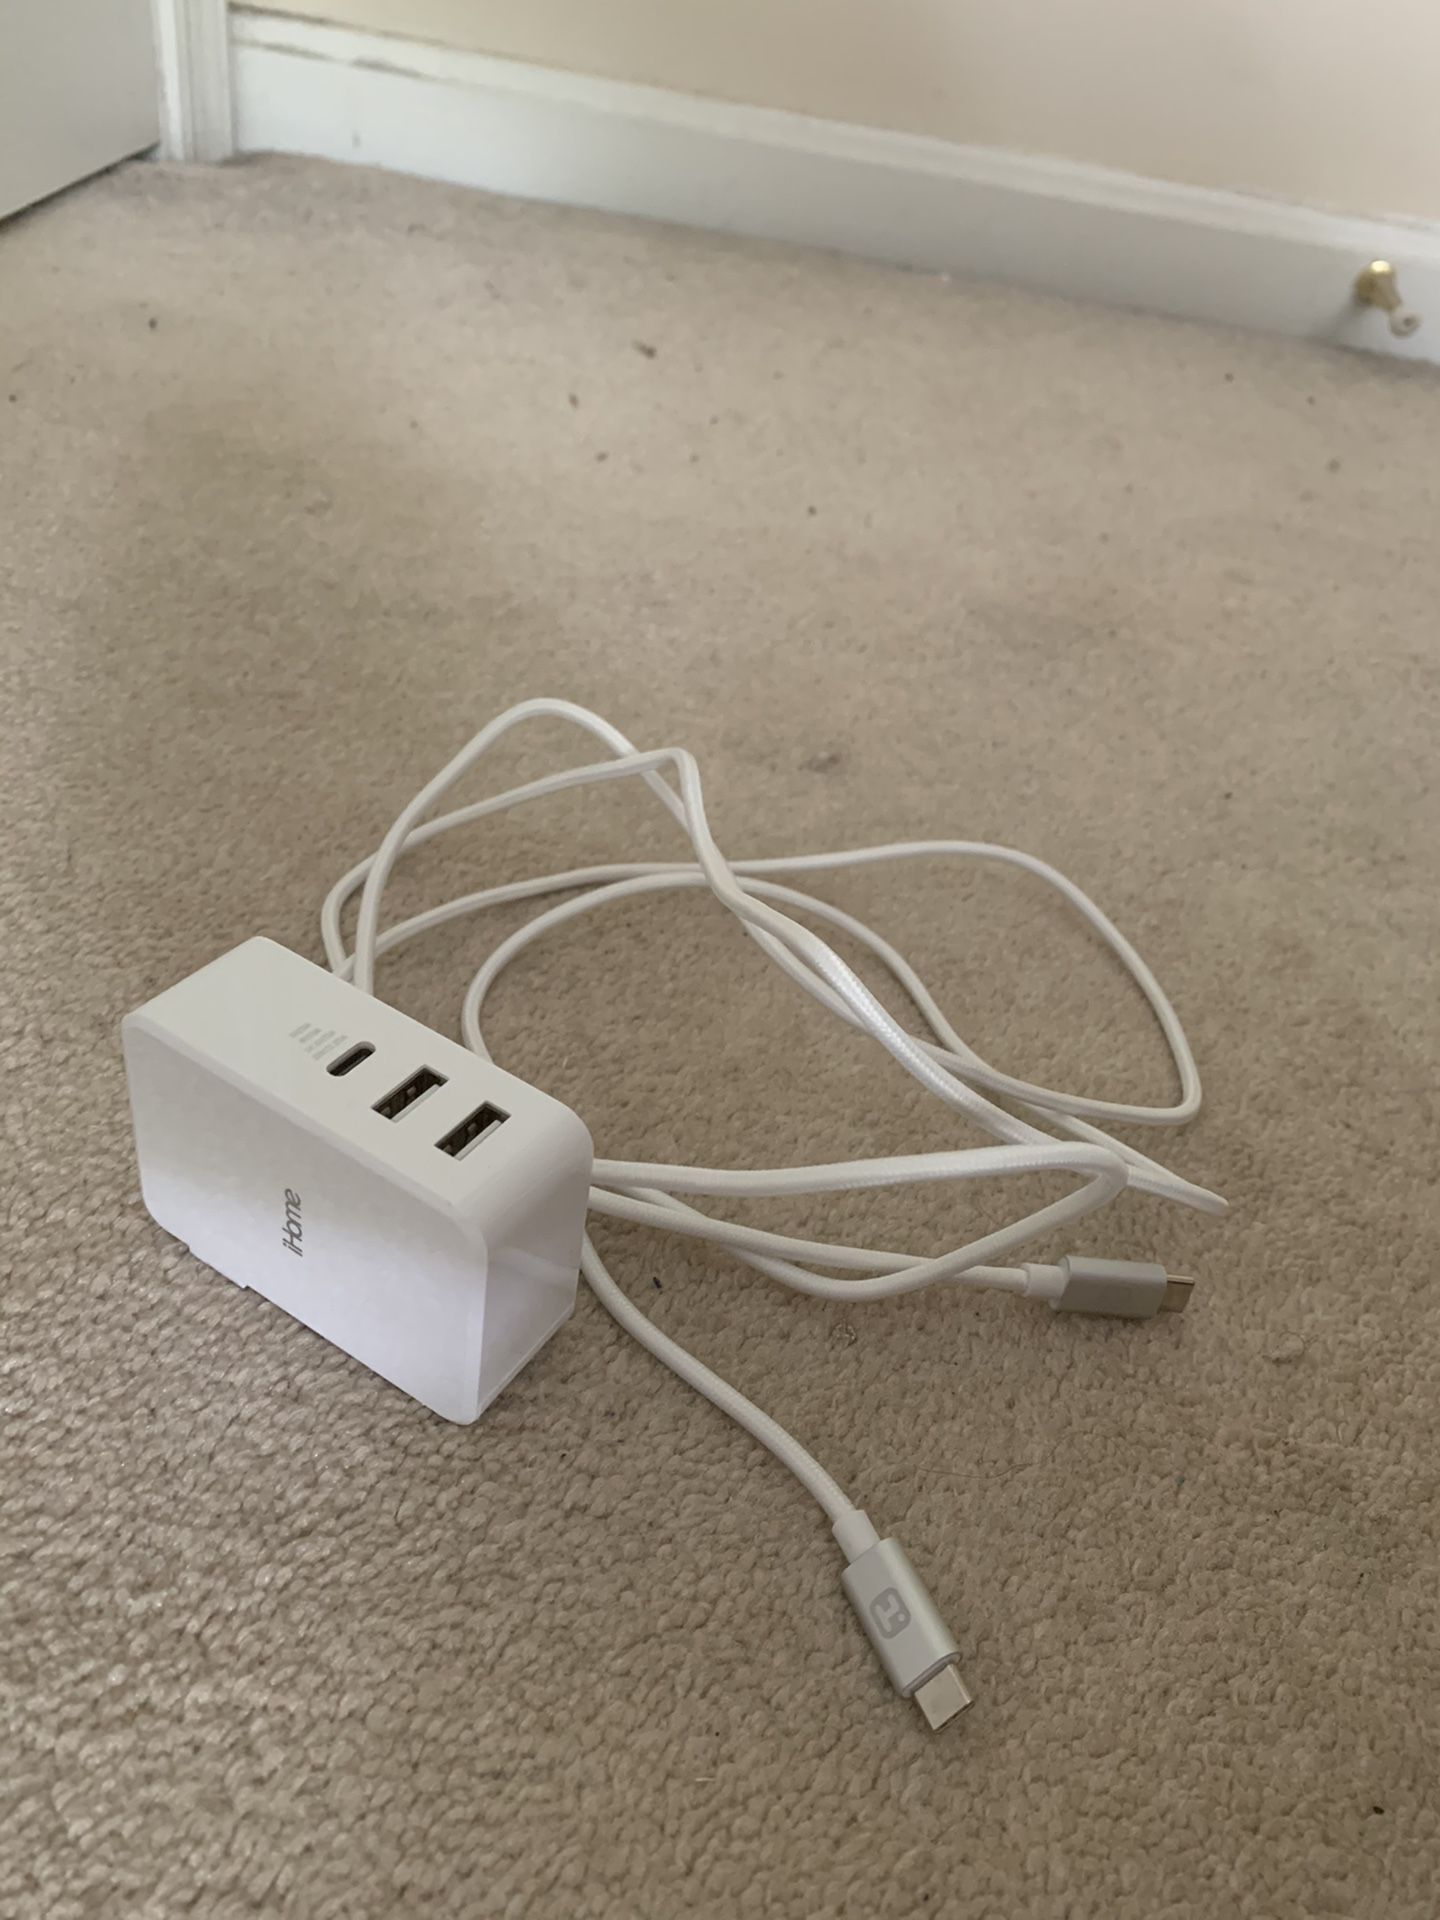 MacBook USB-C Charger by iHome